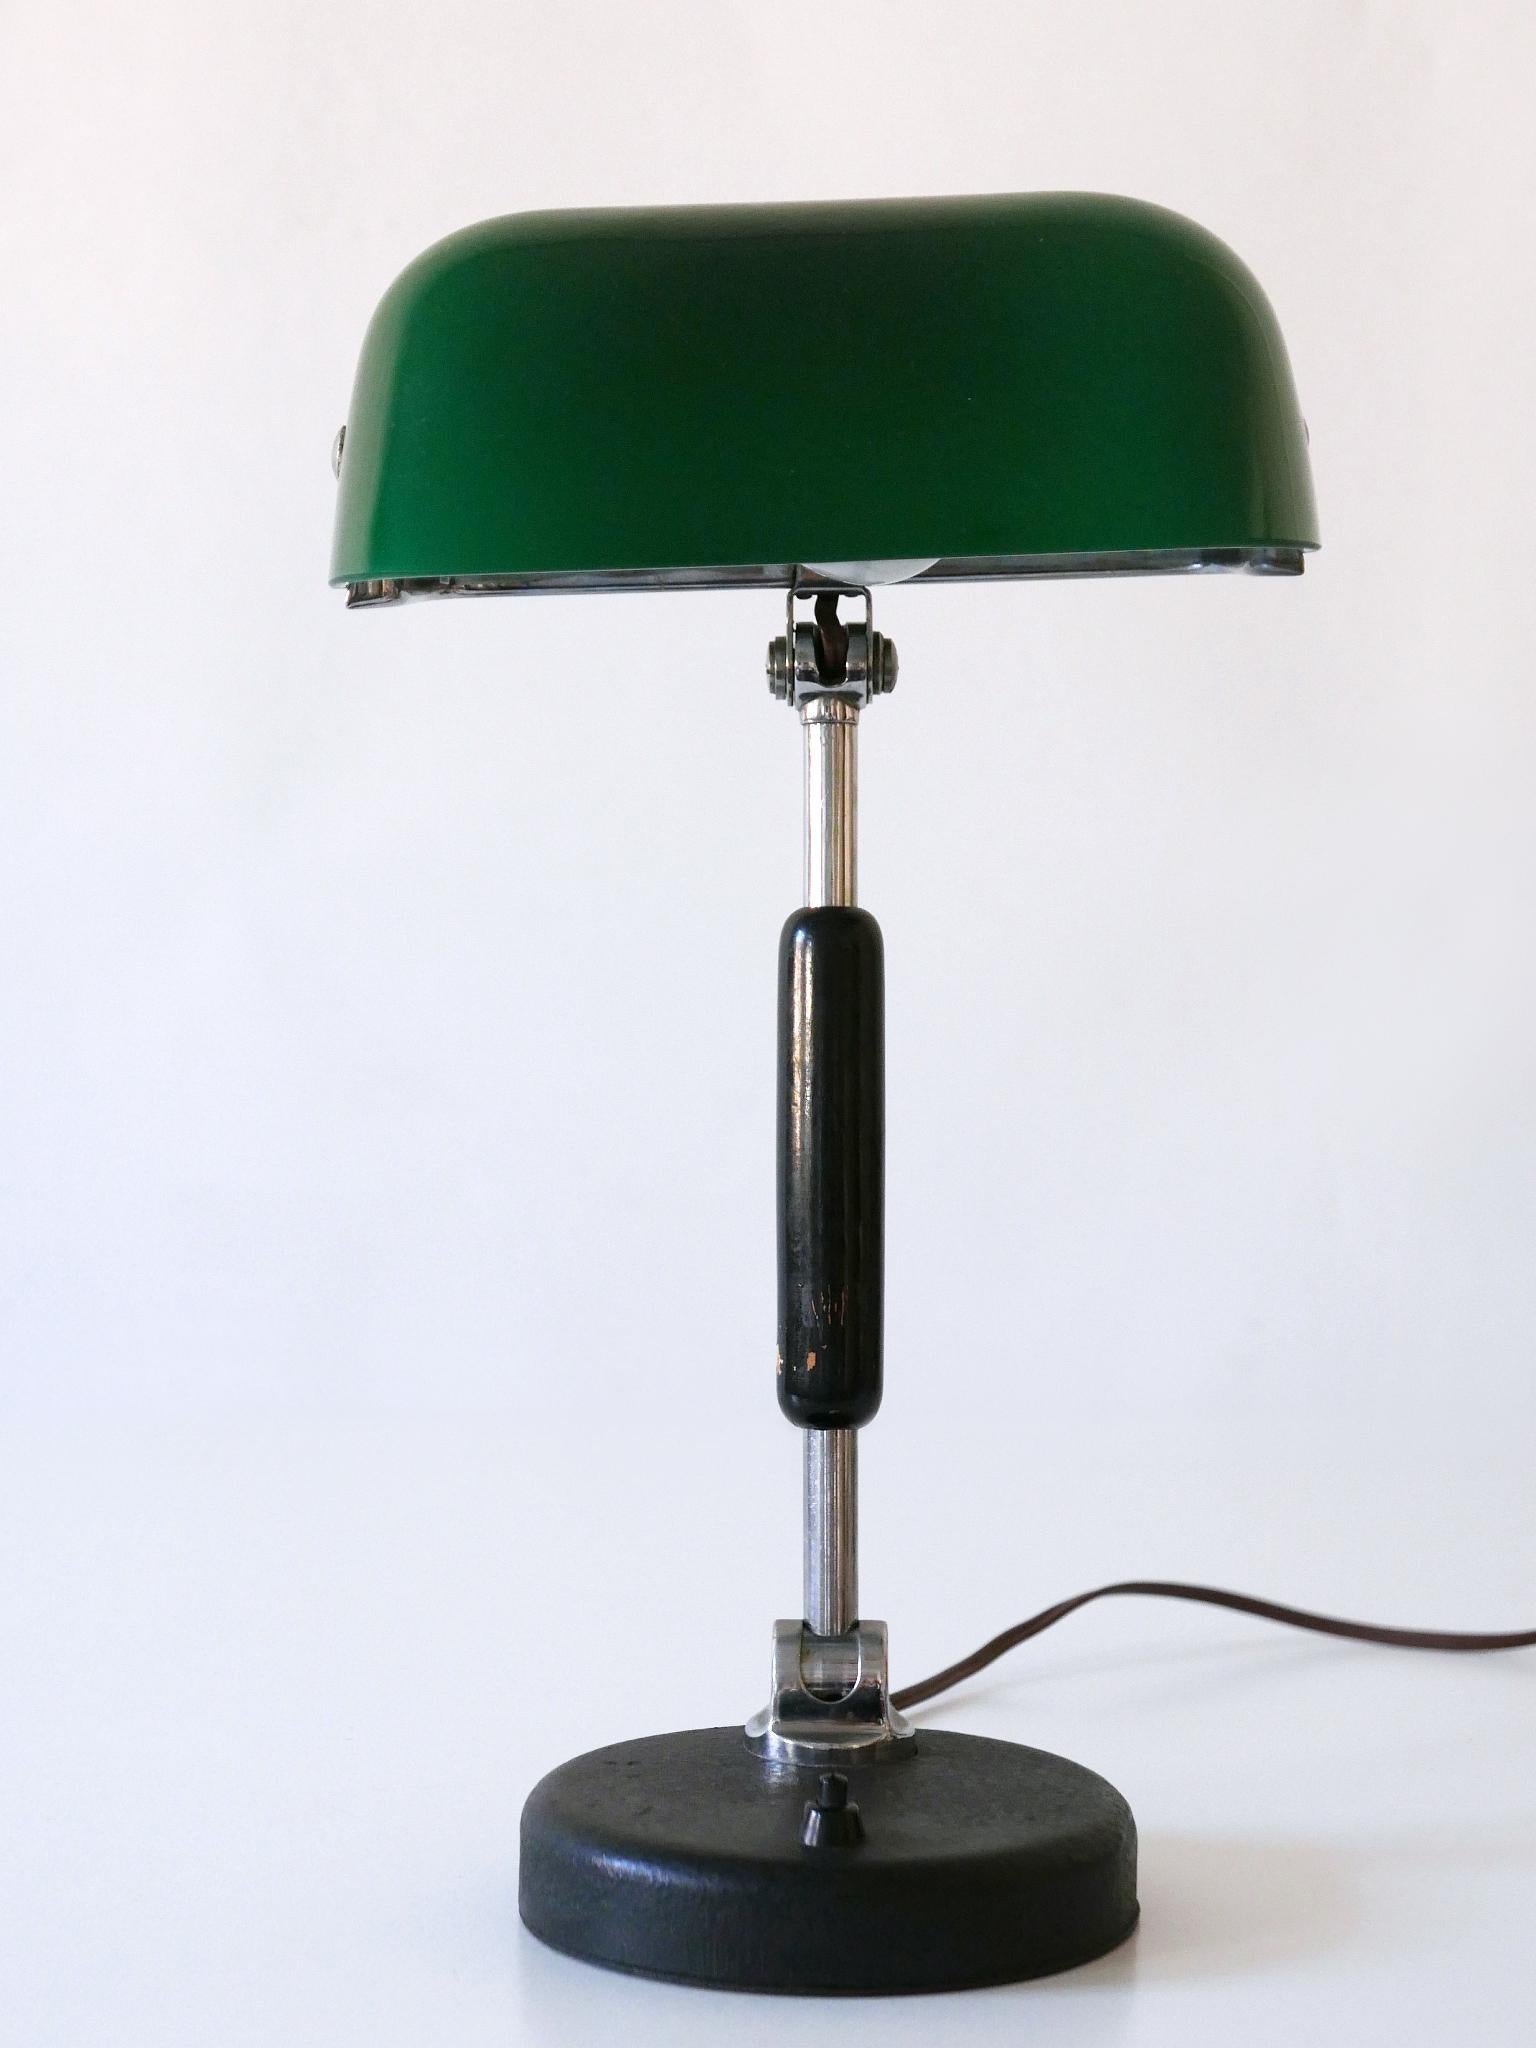 Lacquered Exceptional Bauhaus Bankers Table Lamp with Original Green Glass, 1930s, Germany